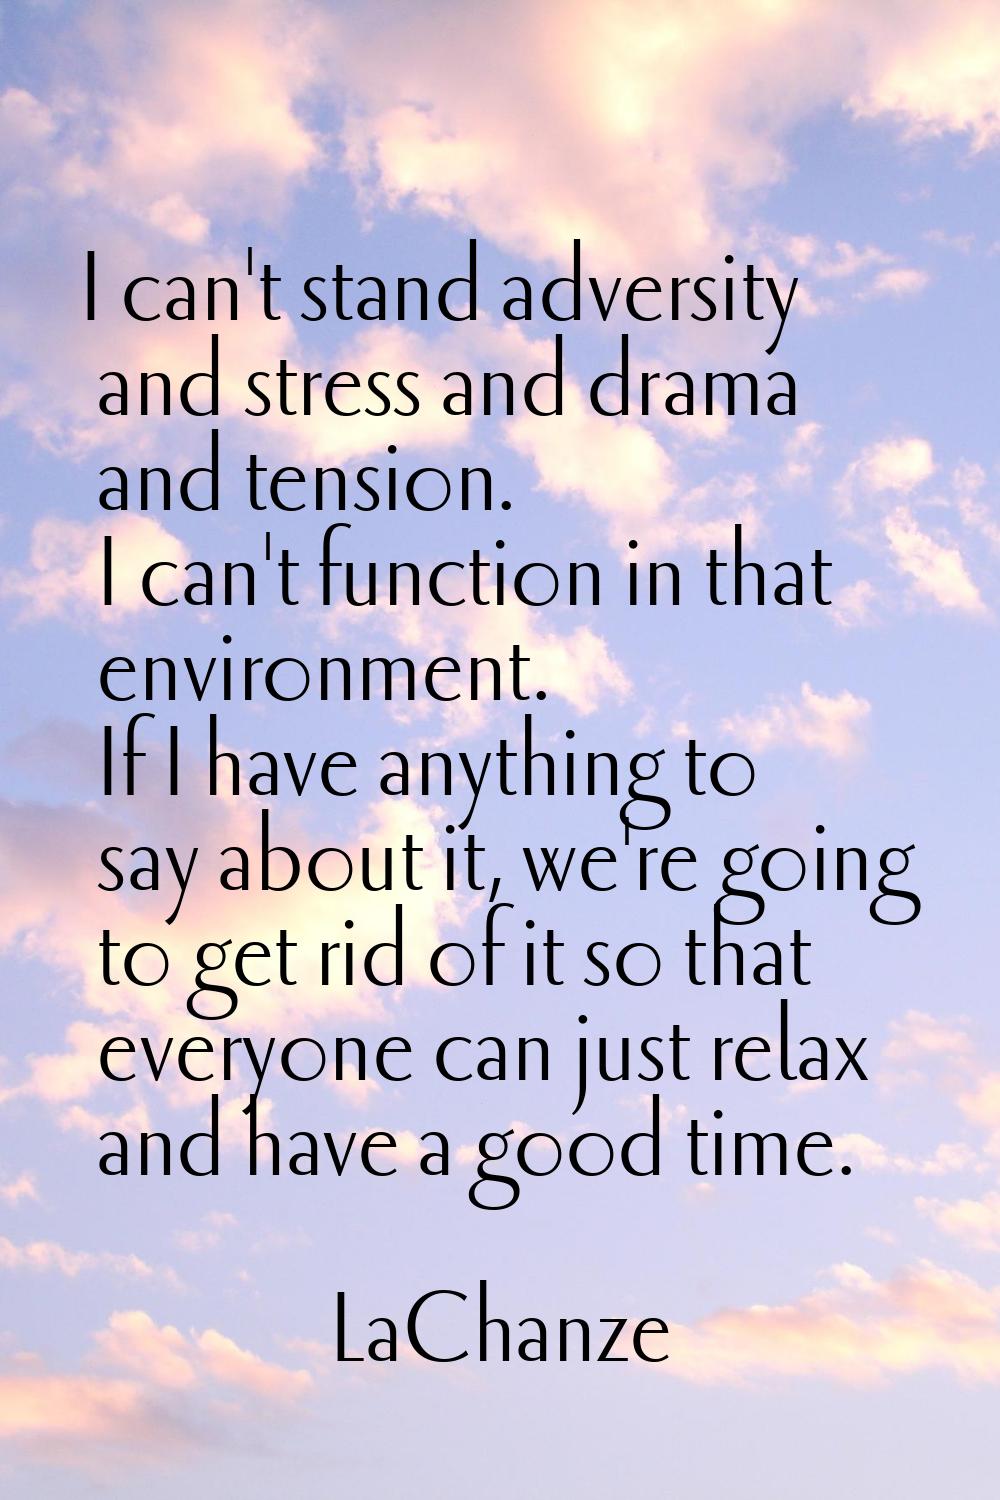 I can't stand adversity and stress and drama and tension. I can't function in that environment. If 